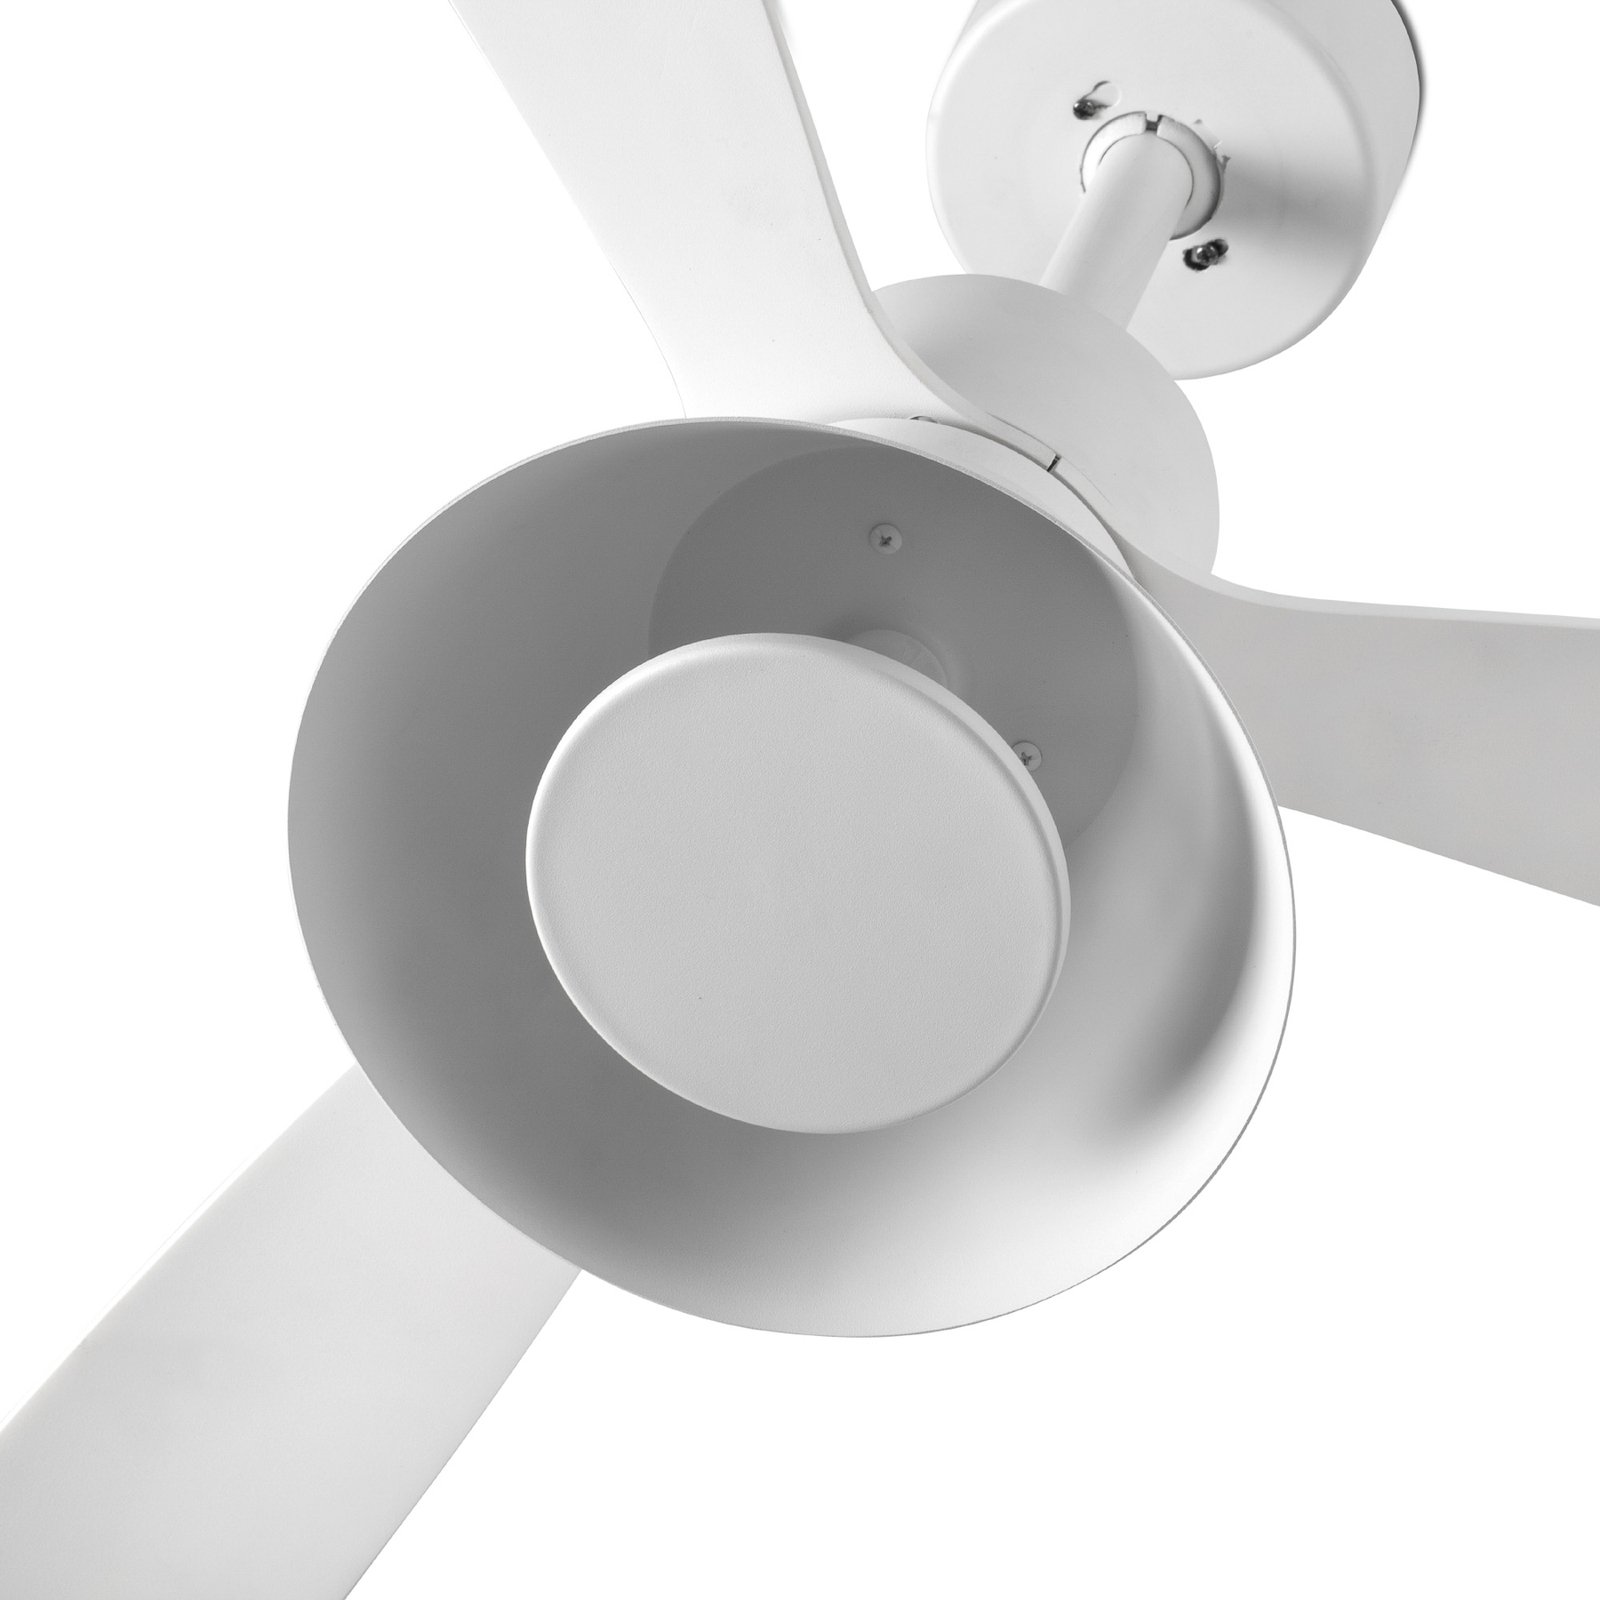 Amelia Cone ceiling fan with an LED light, white